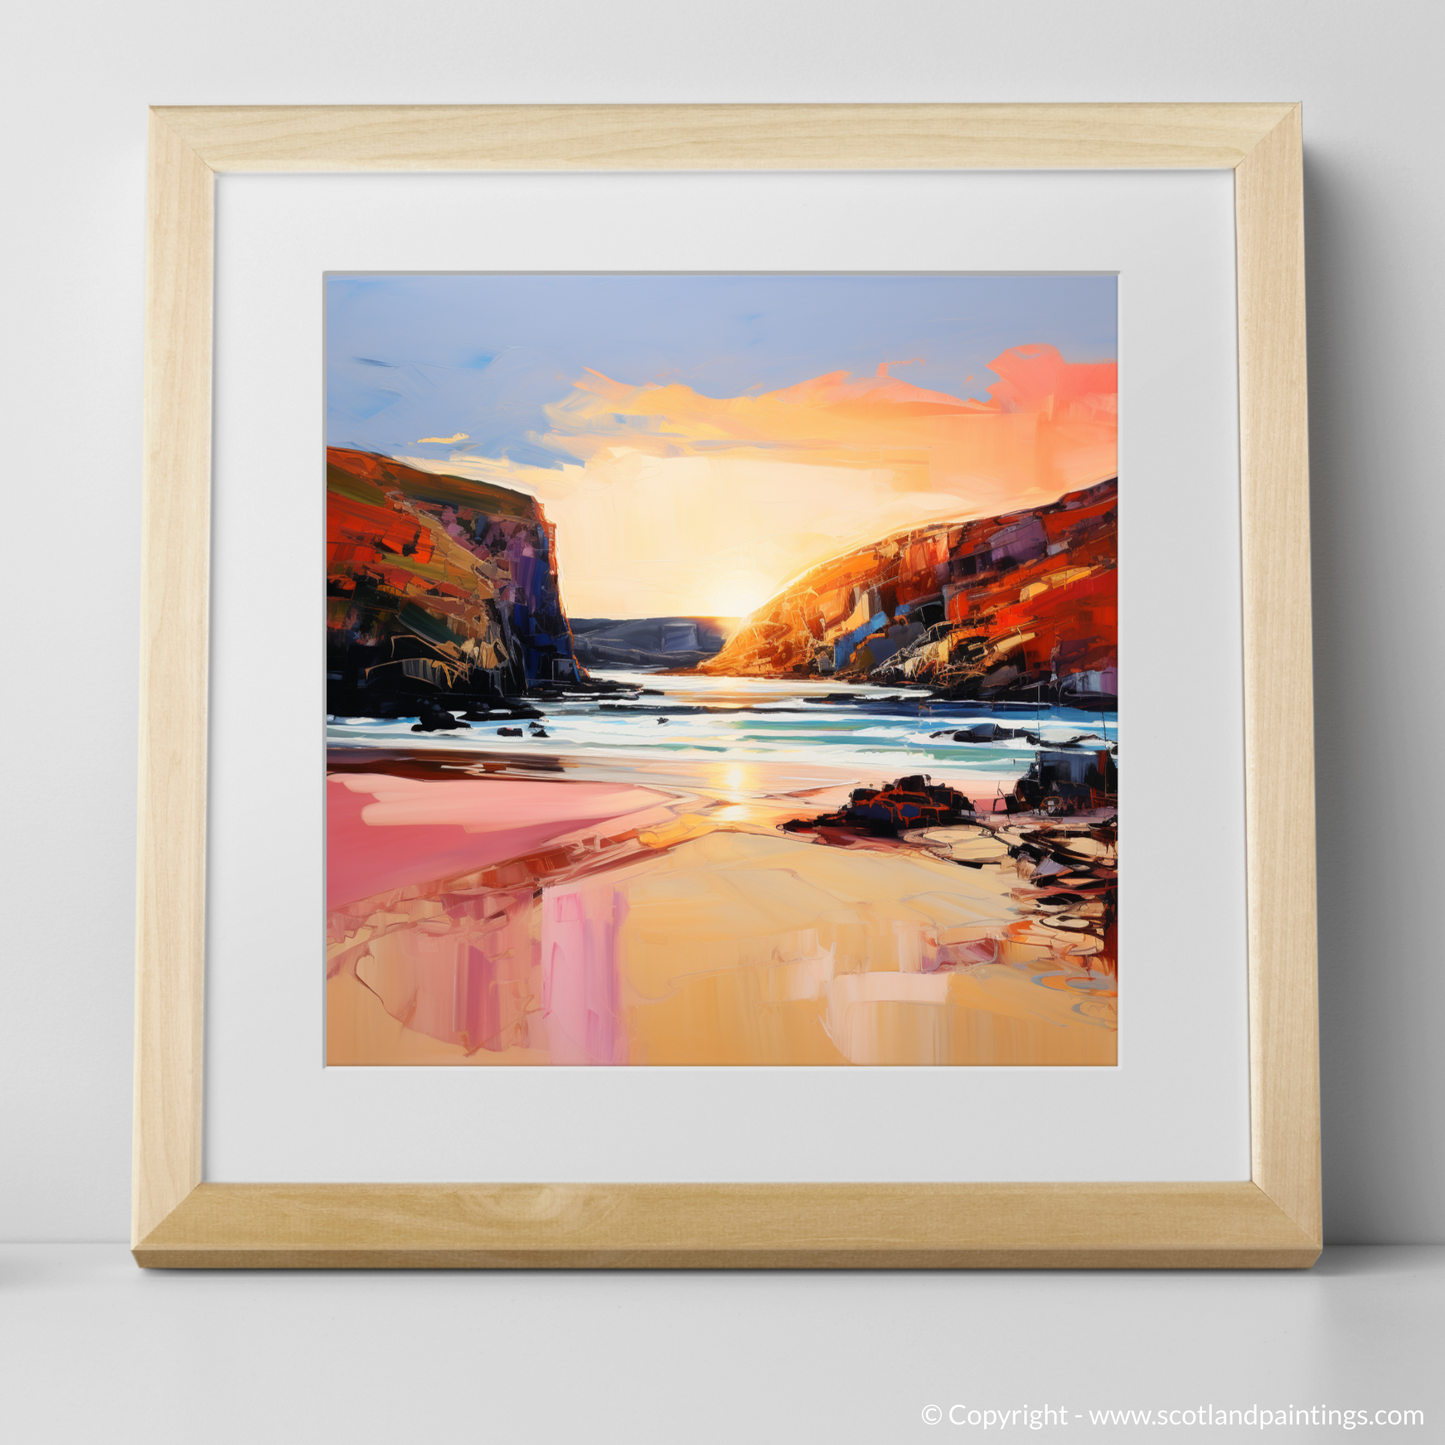 Art Print of Sandwood Bay at golden hour with a natural frame